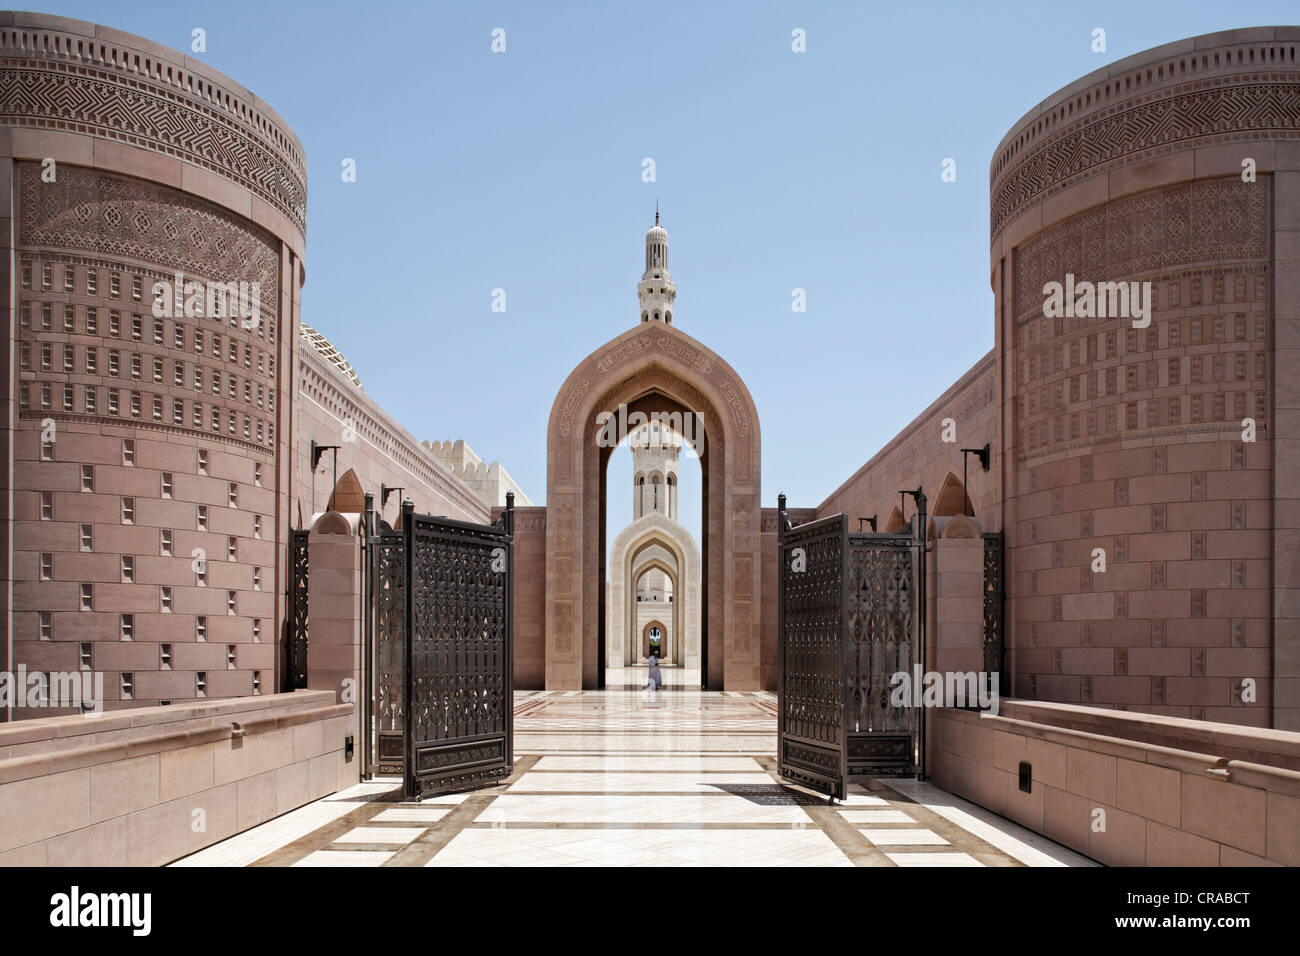 Portal, gate, large square with pointed arch, gates, minaret, Sultan Qaboos Grand Mosque, Muscat capital, Sultanate of Oman Stock Photo